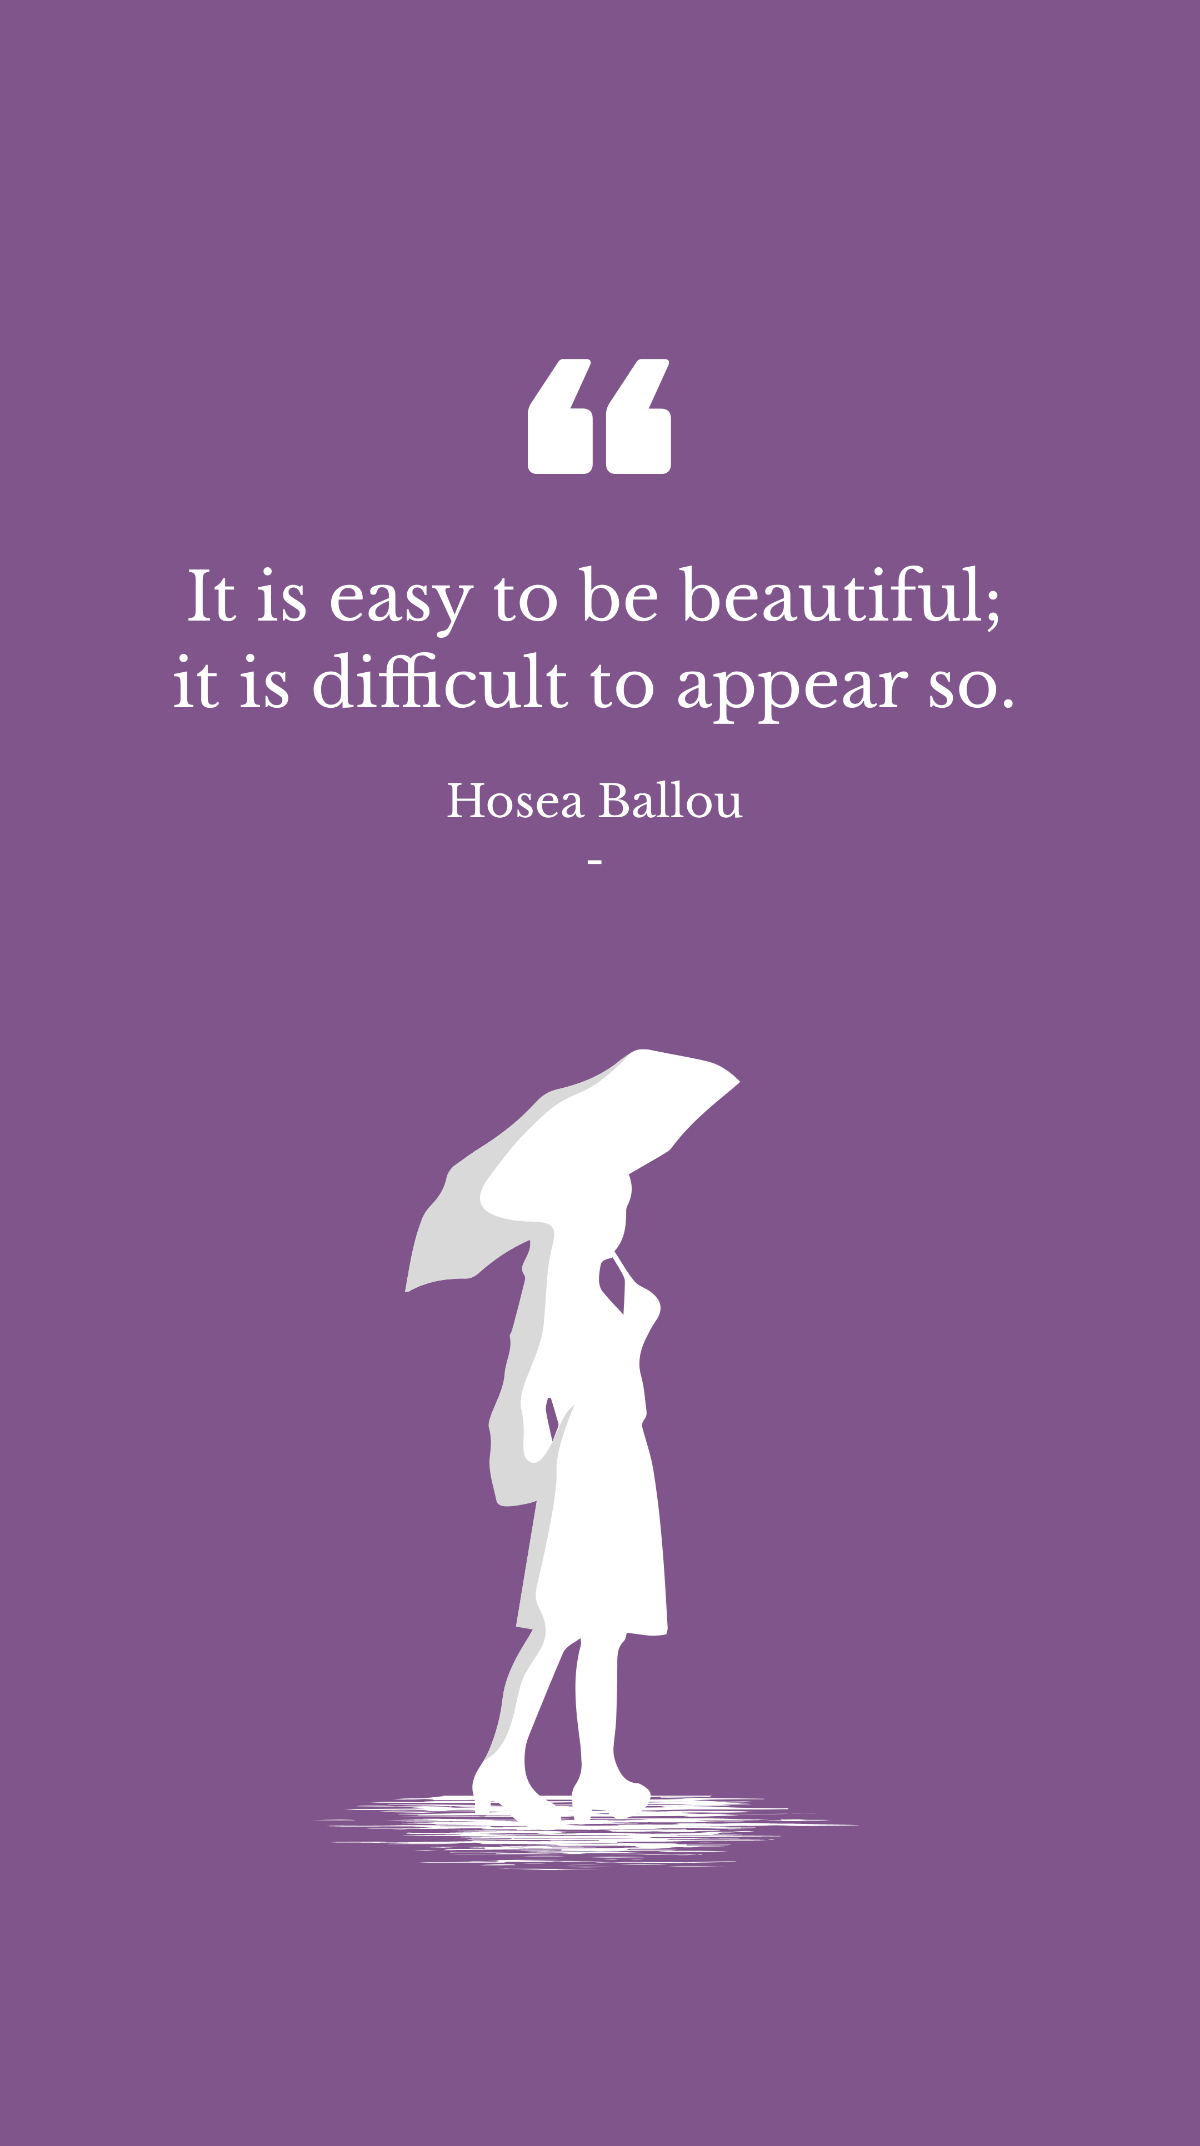 Free Hosea Ballou - It is easy to be beautiful; it is difficult to appear so. Template